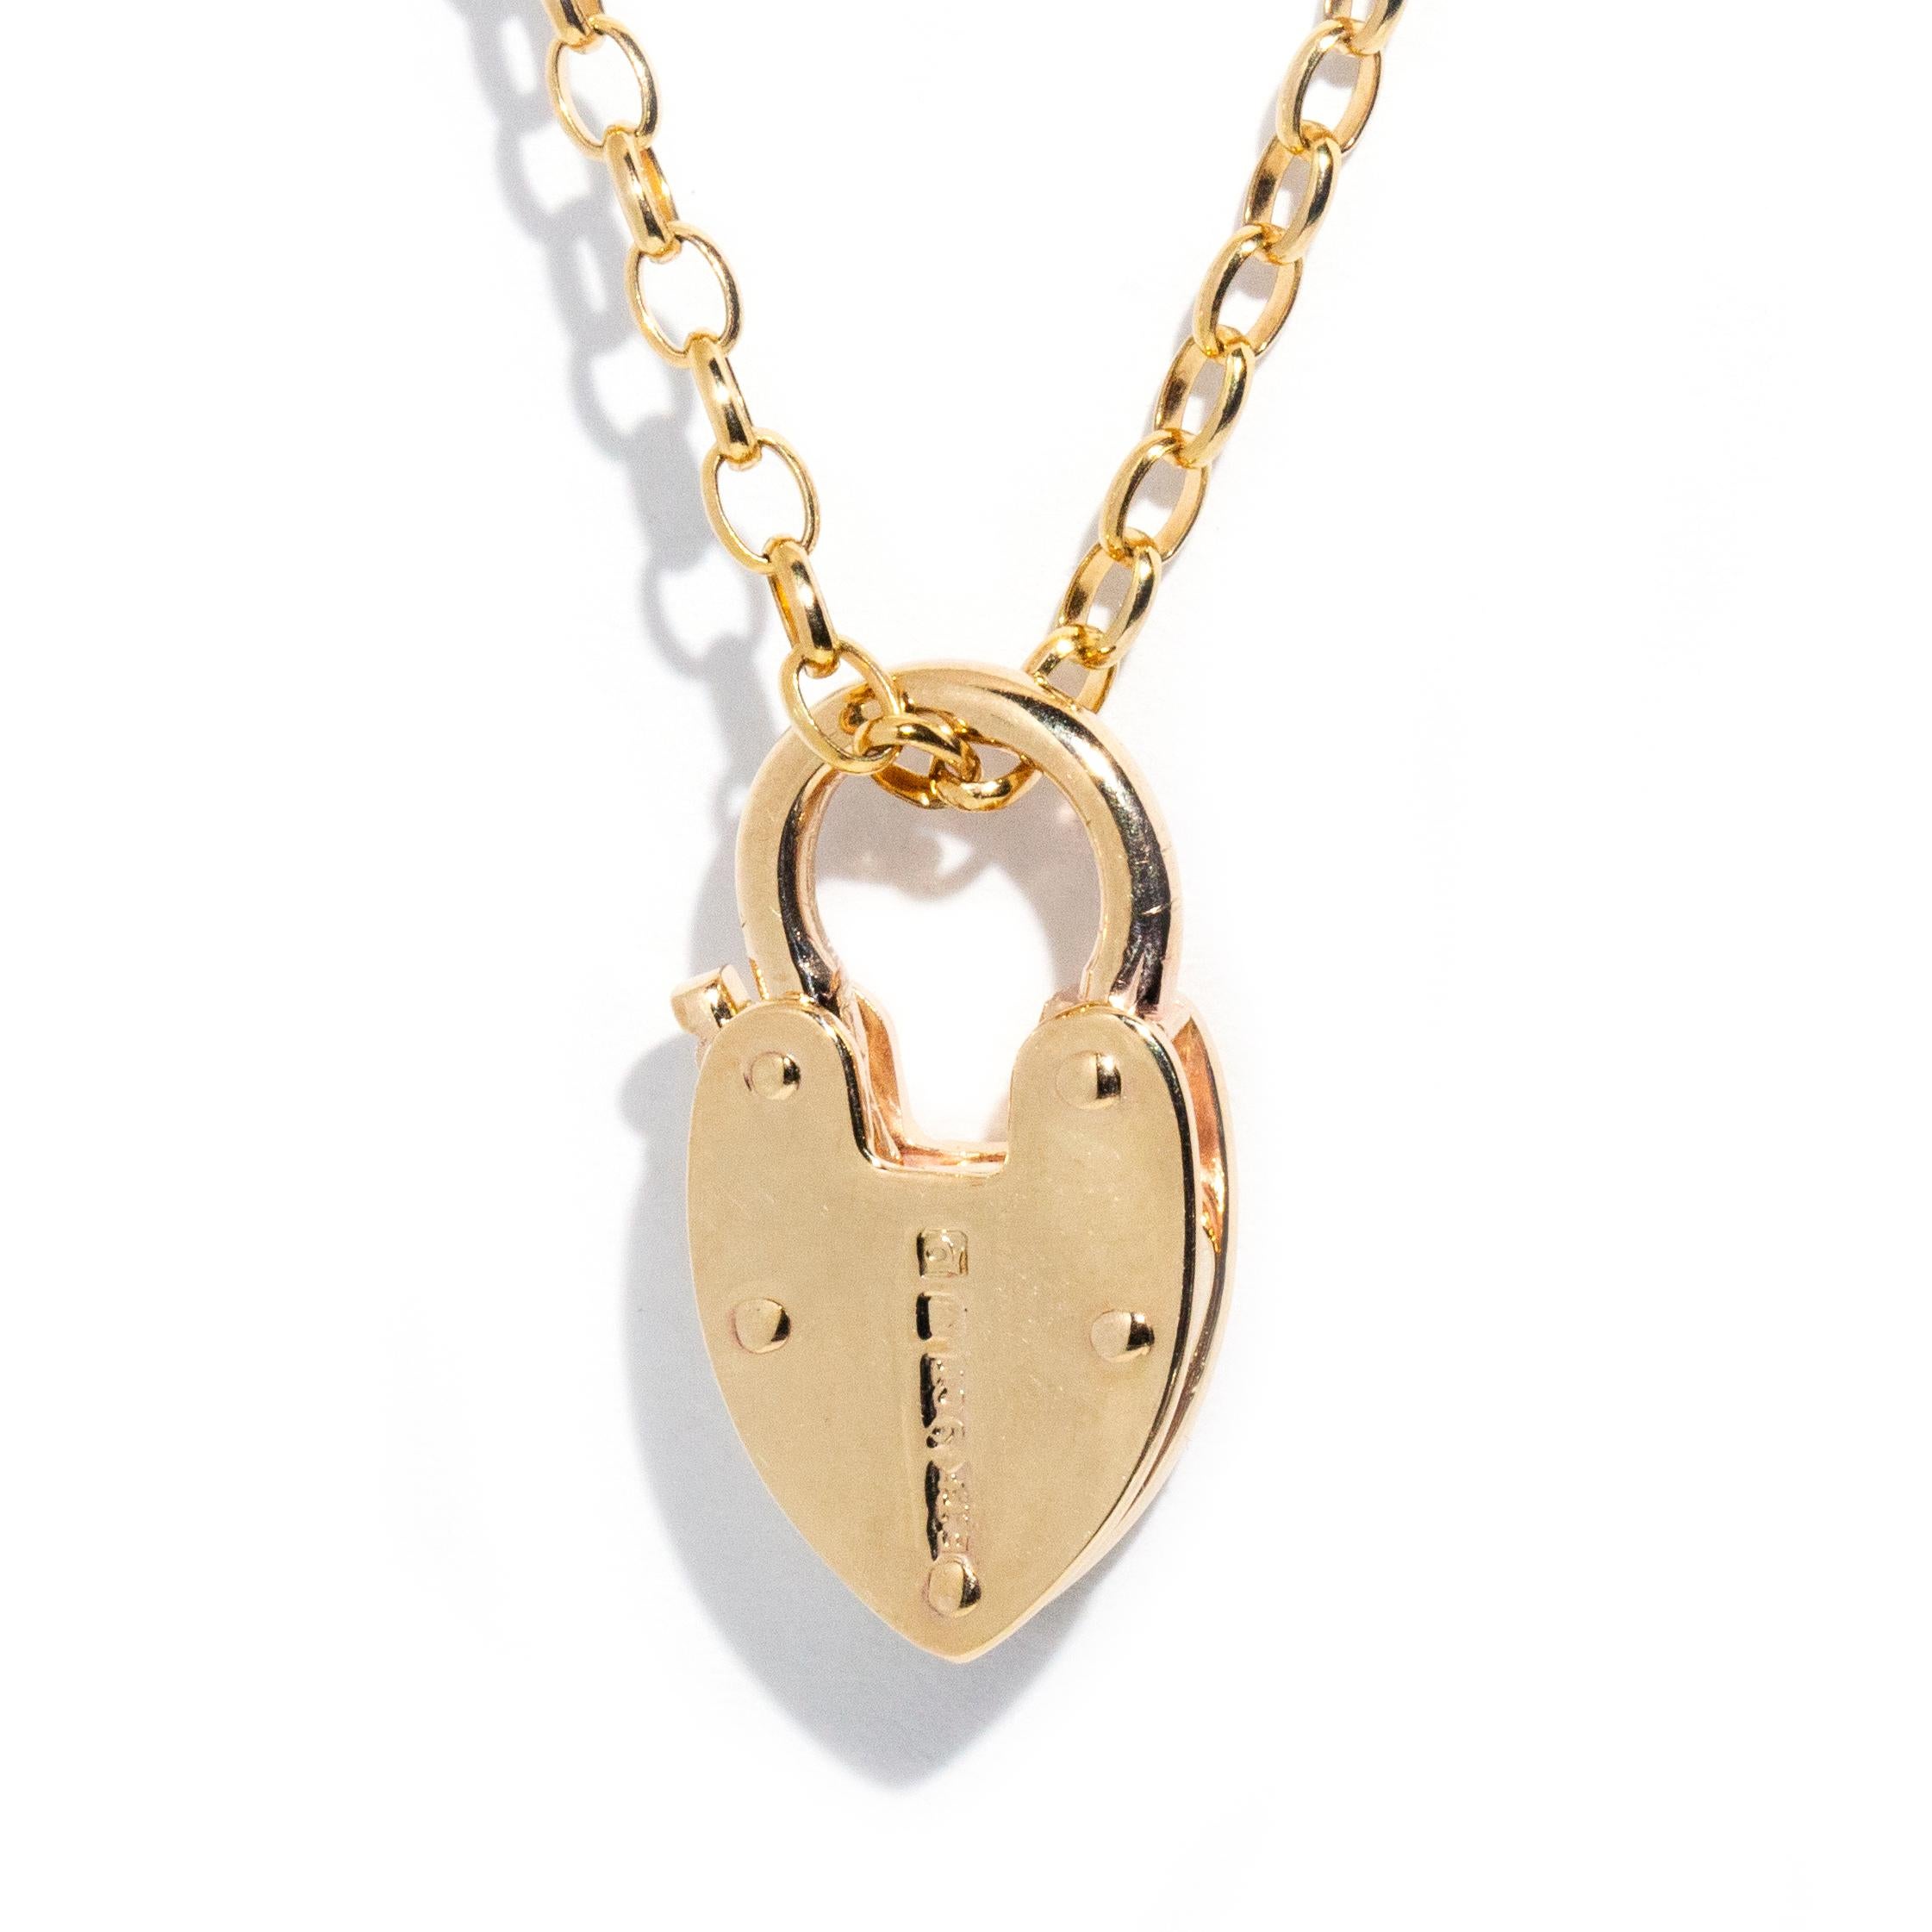 9ct gold padlock necklace